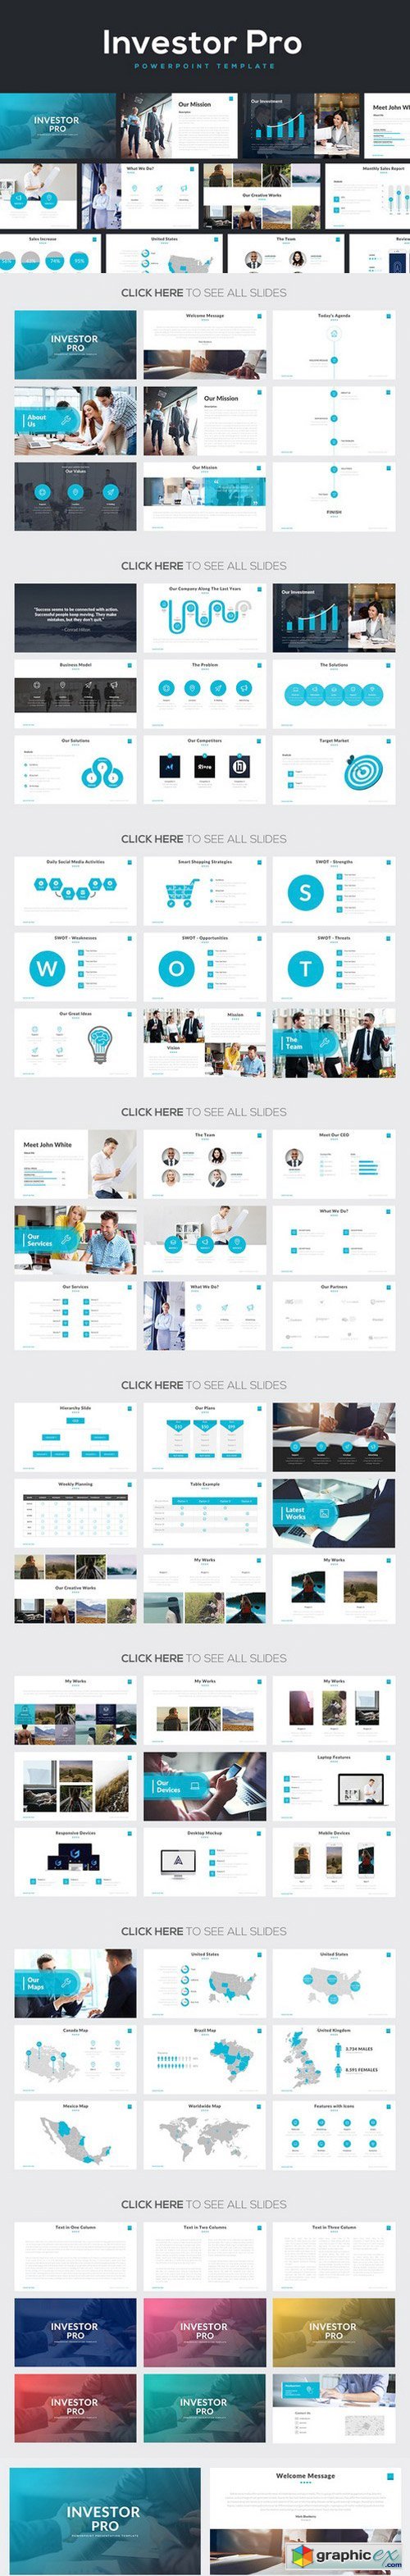 Investor Pro Powerpoint Template